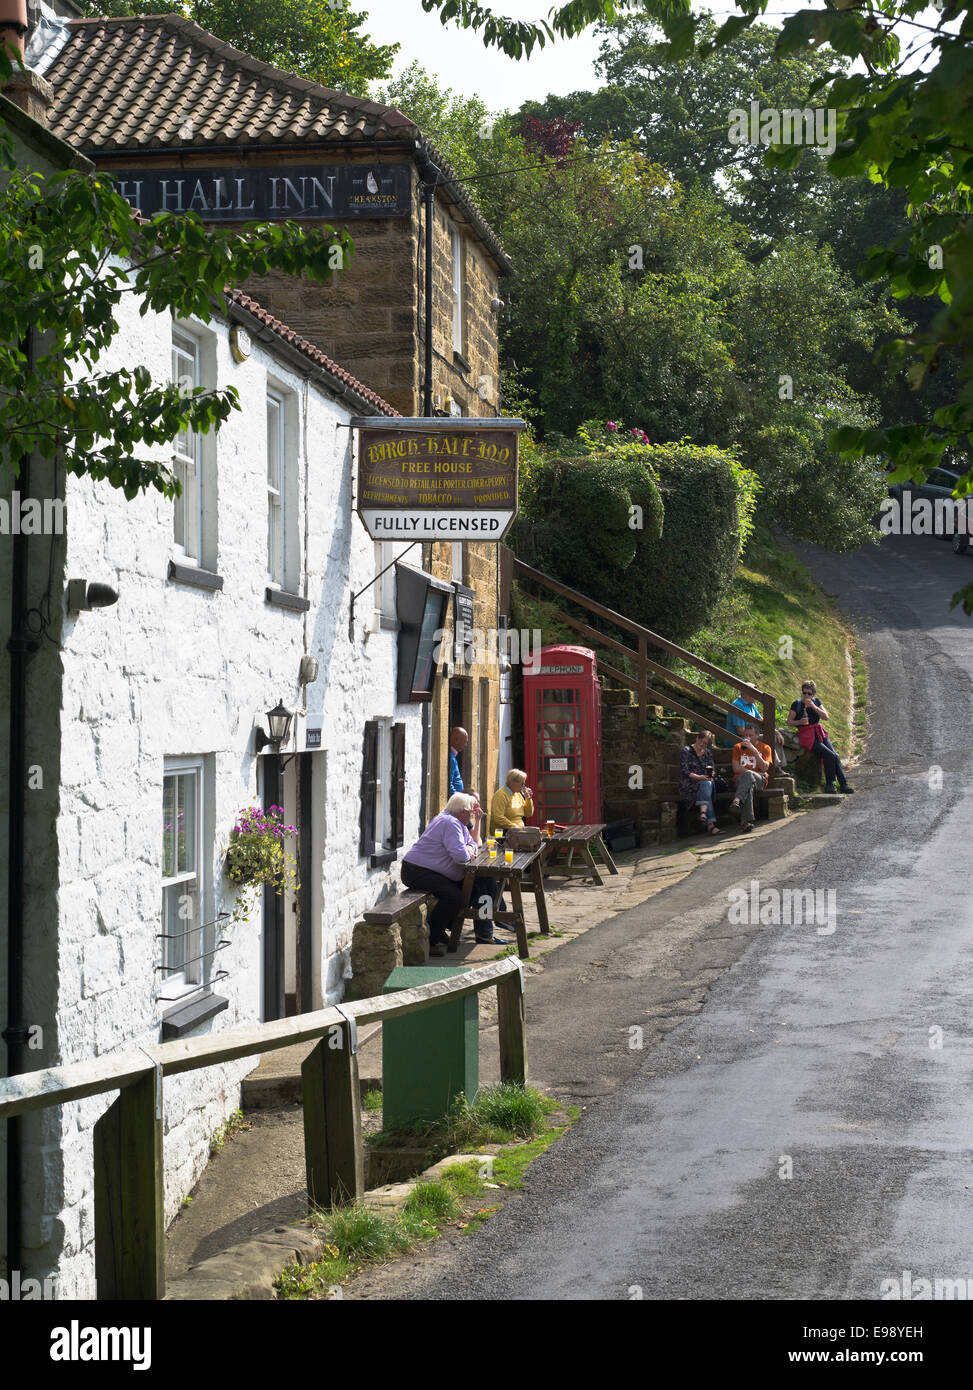 dh Birch Hall Inn Yorks Moors BECK HOLE PUB NORTH YORKSHIRE UK People outside traditional public house drinking beer country village pubs summer Stock Photo